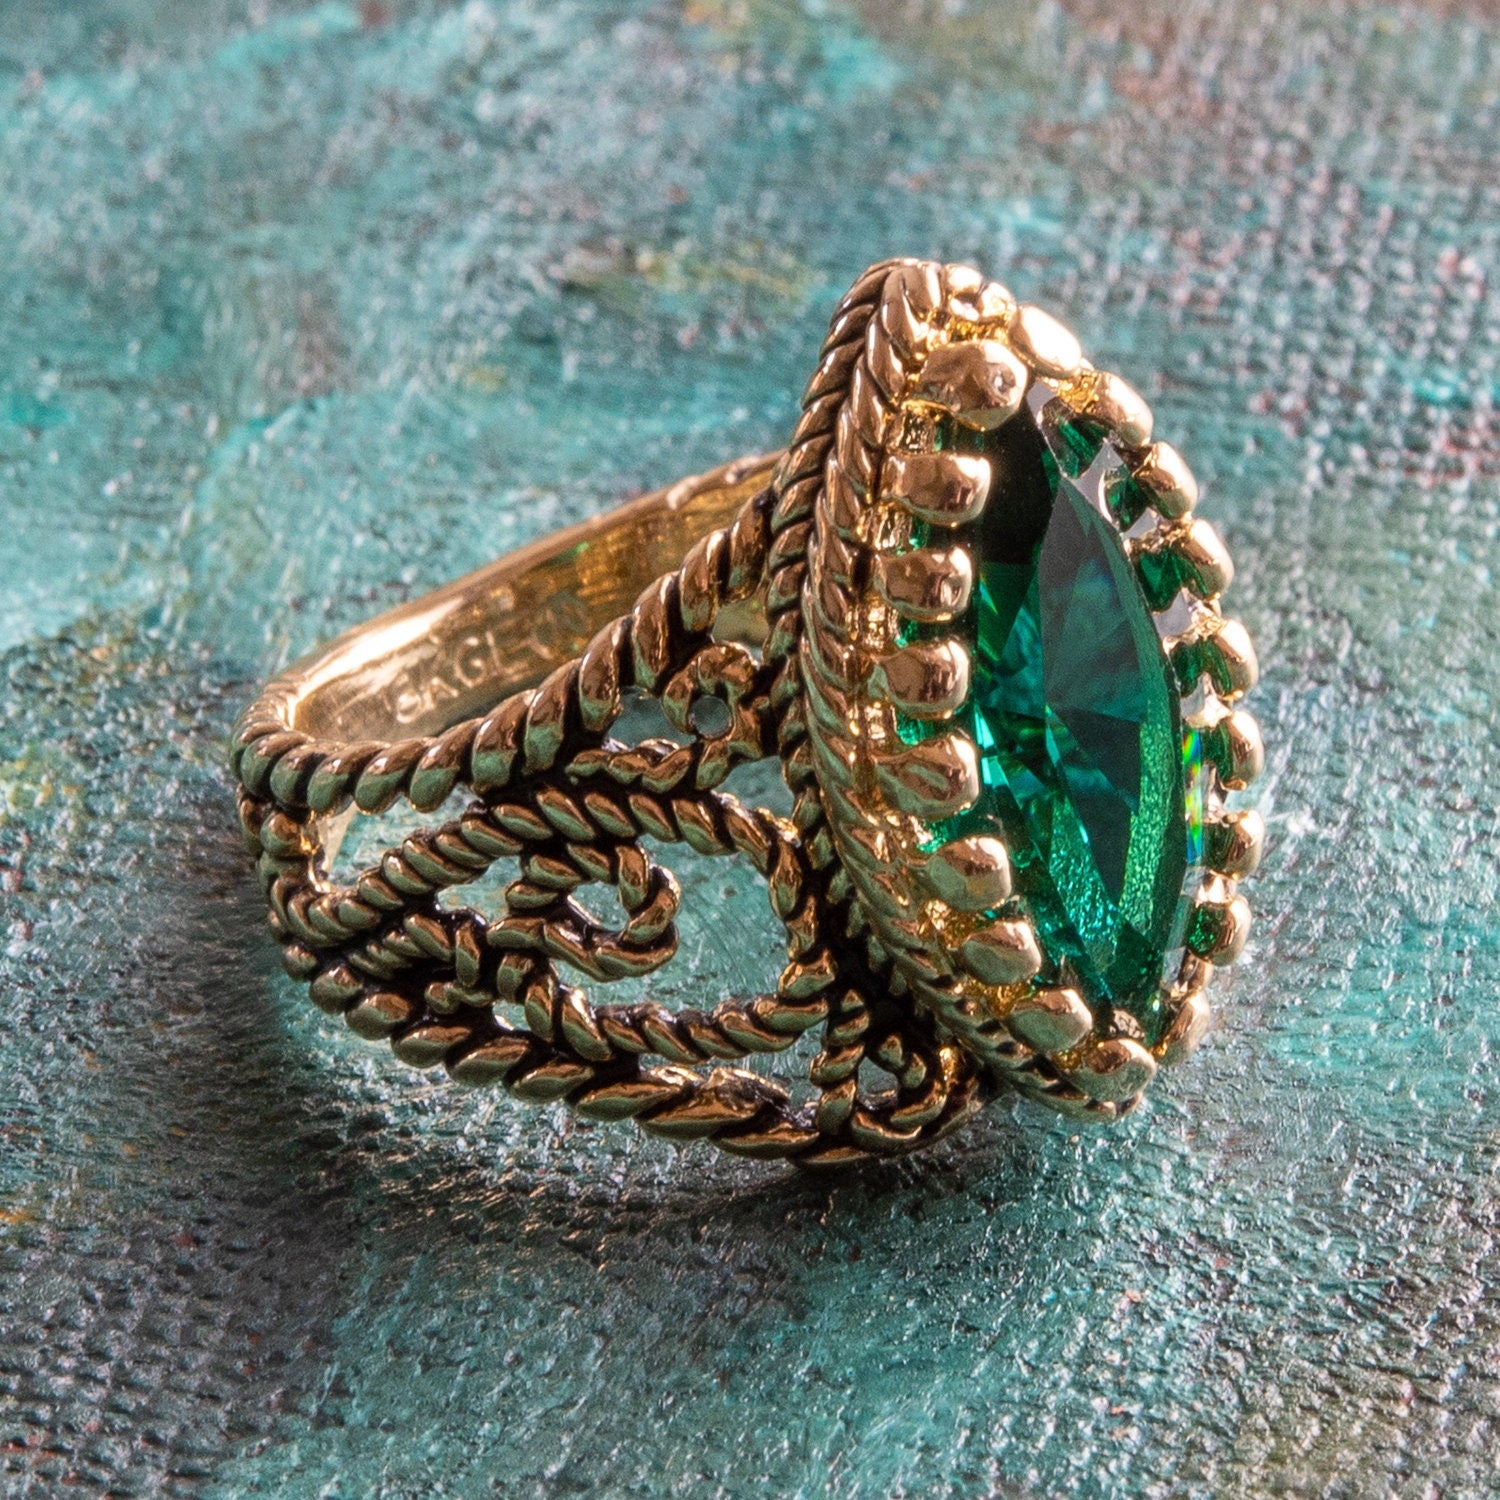 Vintage Ring Emerald Swarovski Crystal Antique 18k Gold Filigree Edwardian Style Womans Victorian Jewelry R1444 - Limited Stock - Never Worn